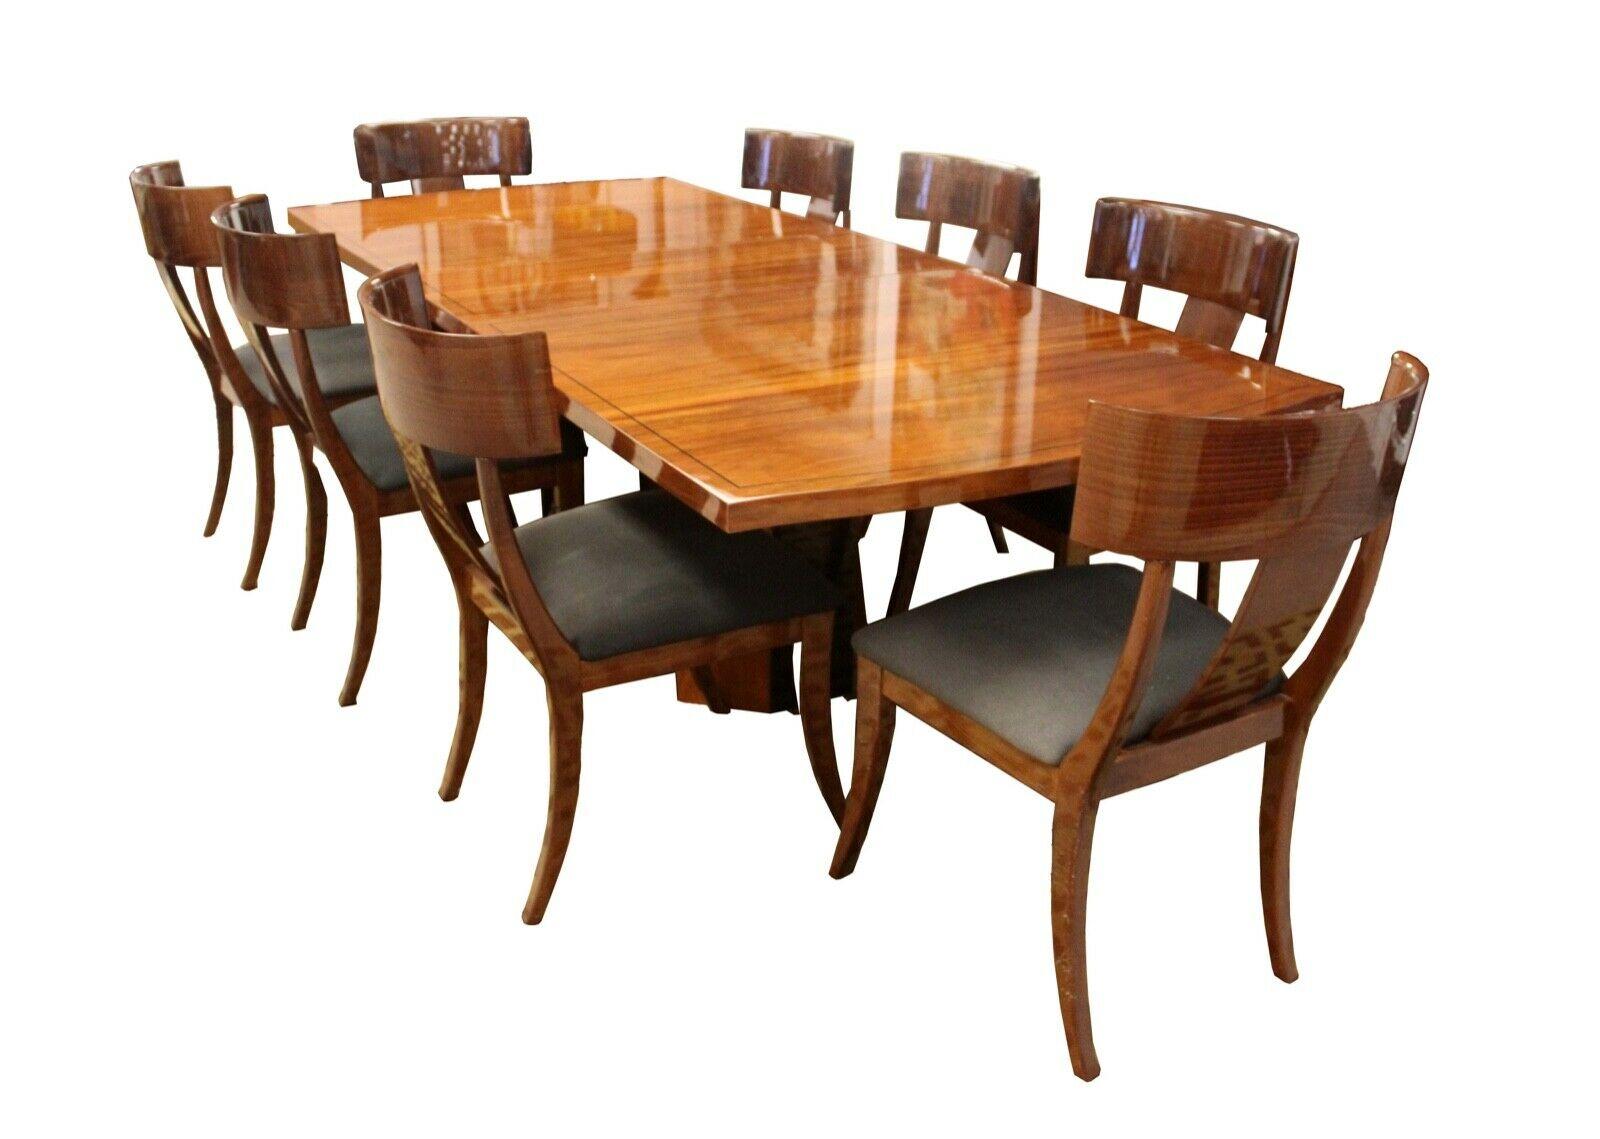 Italian Pietro Costantini for Ello Wood Lacquered Dining Table 8 Chairs & Credenza